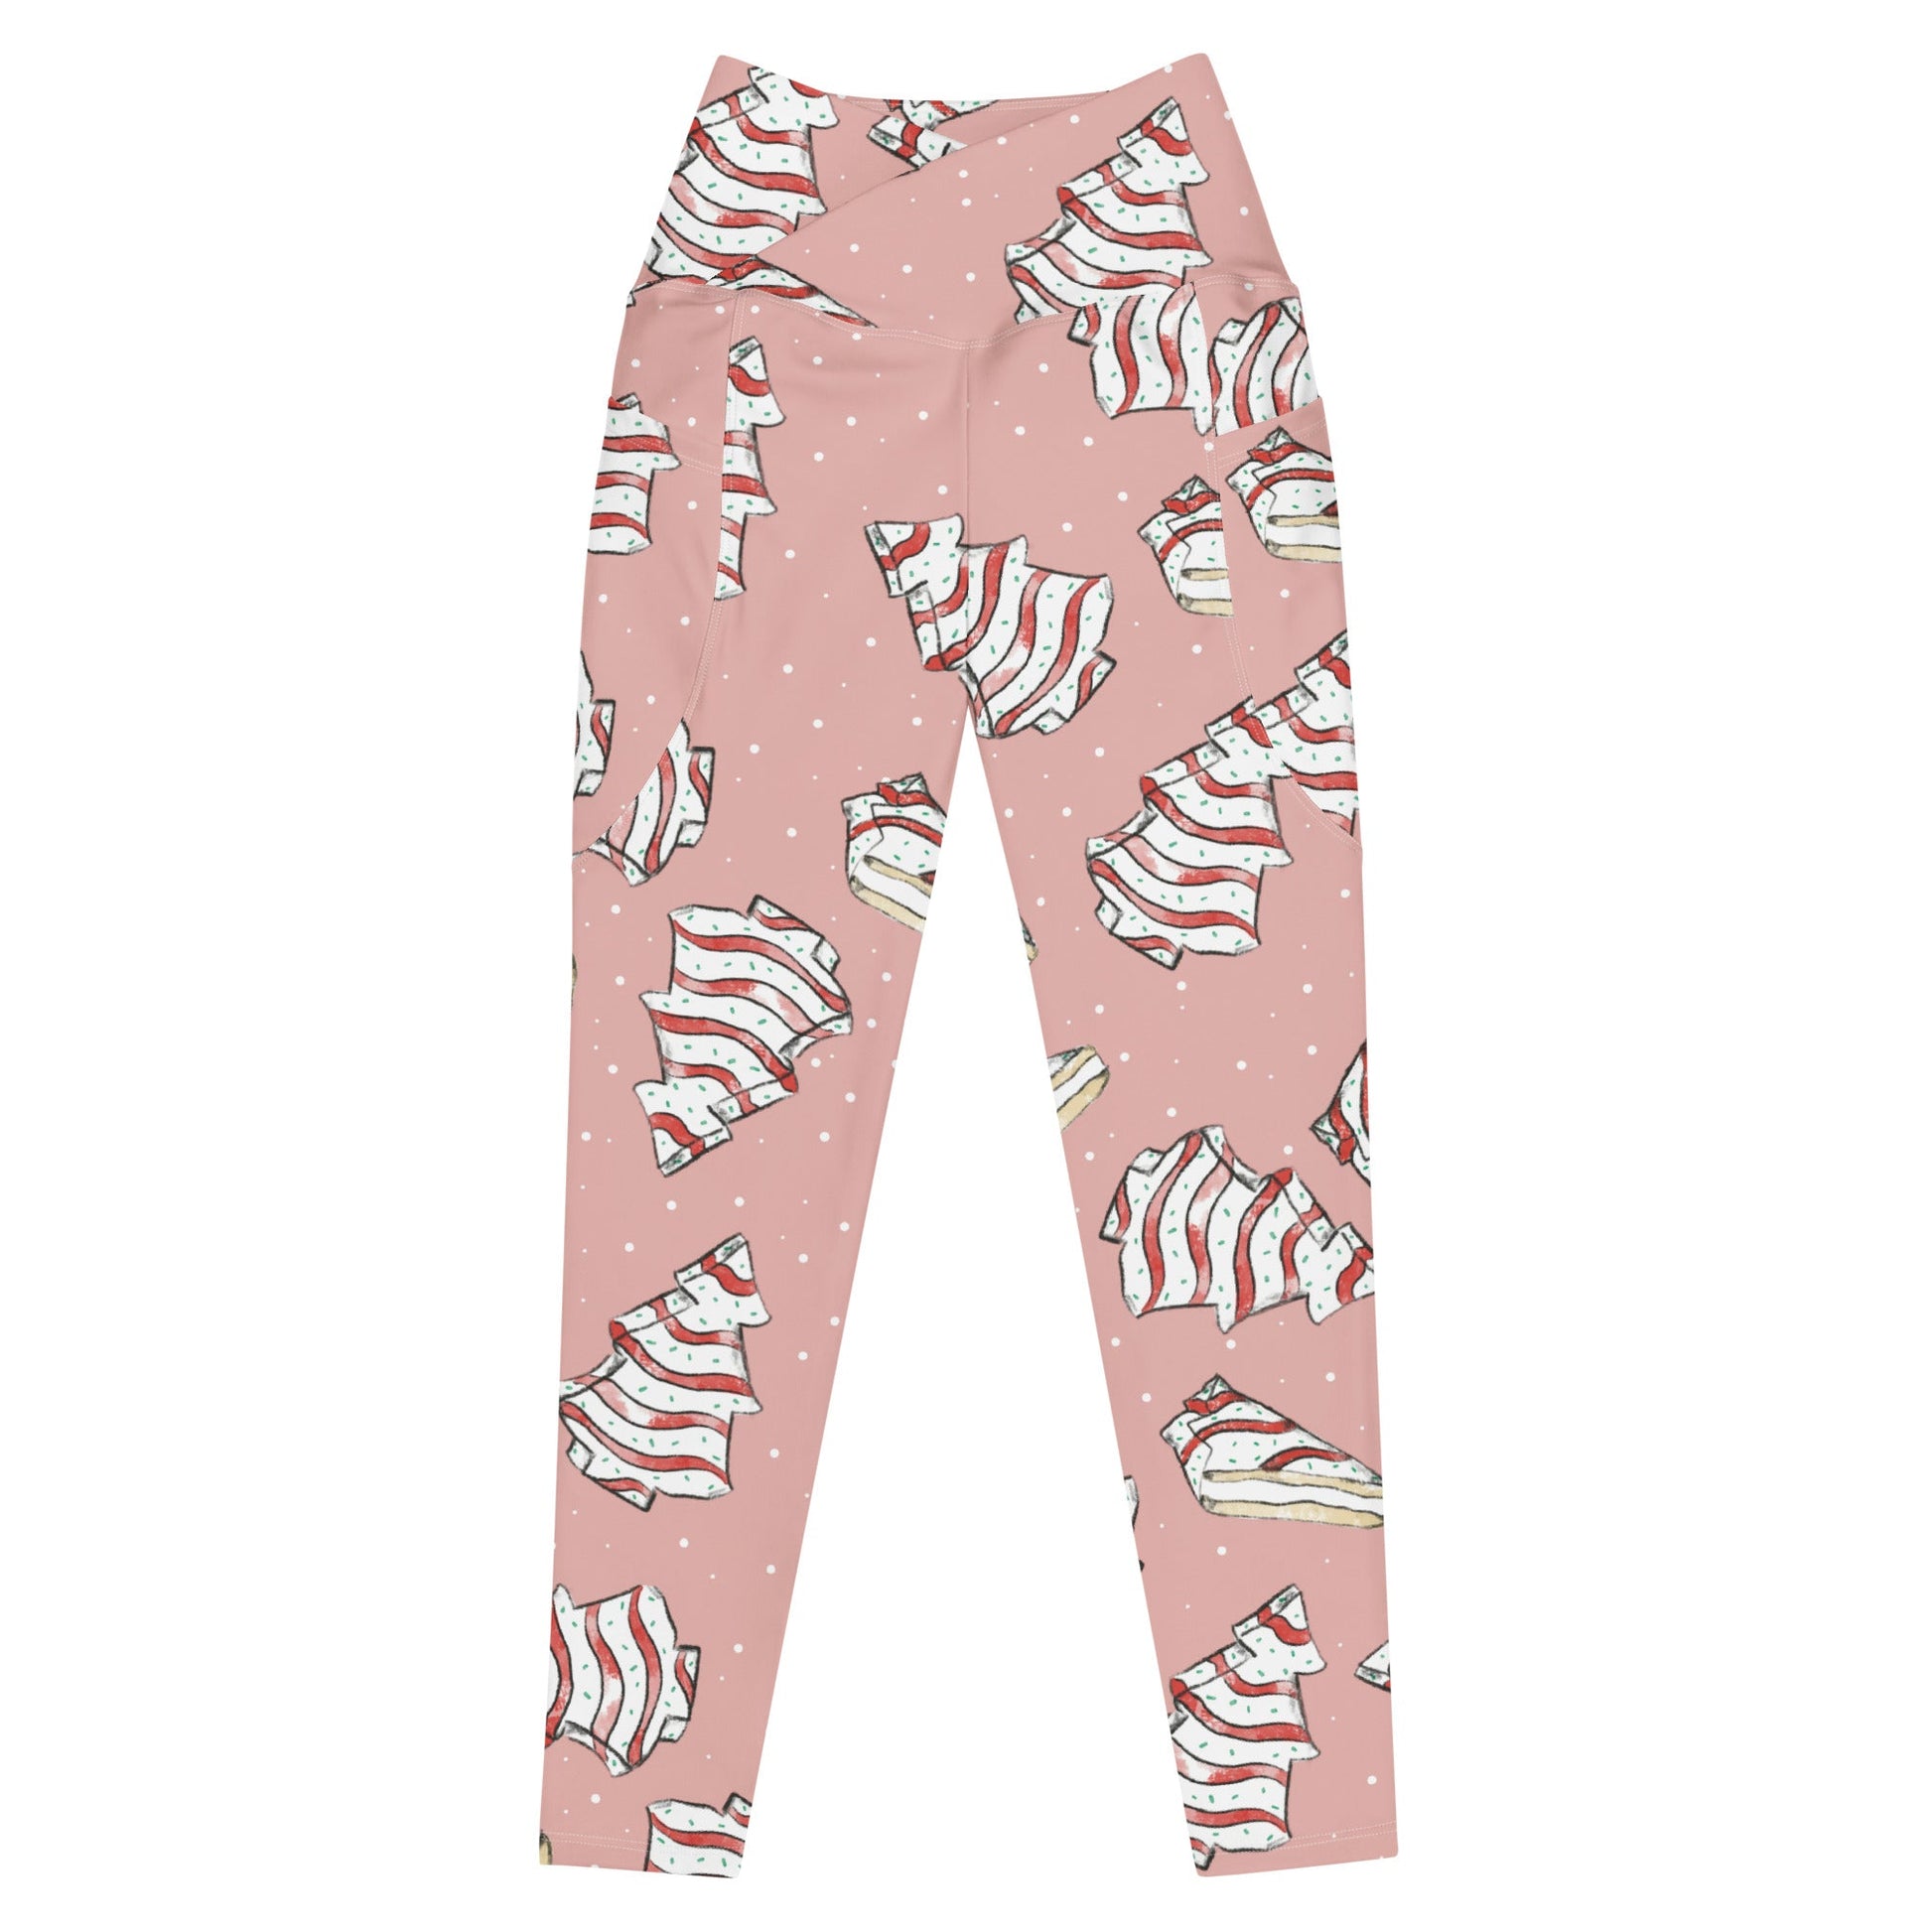 Pink Christmas Cakes Crossover leggings with pockets activewearchristmas CakesLittle Lady Shay Boutique